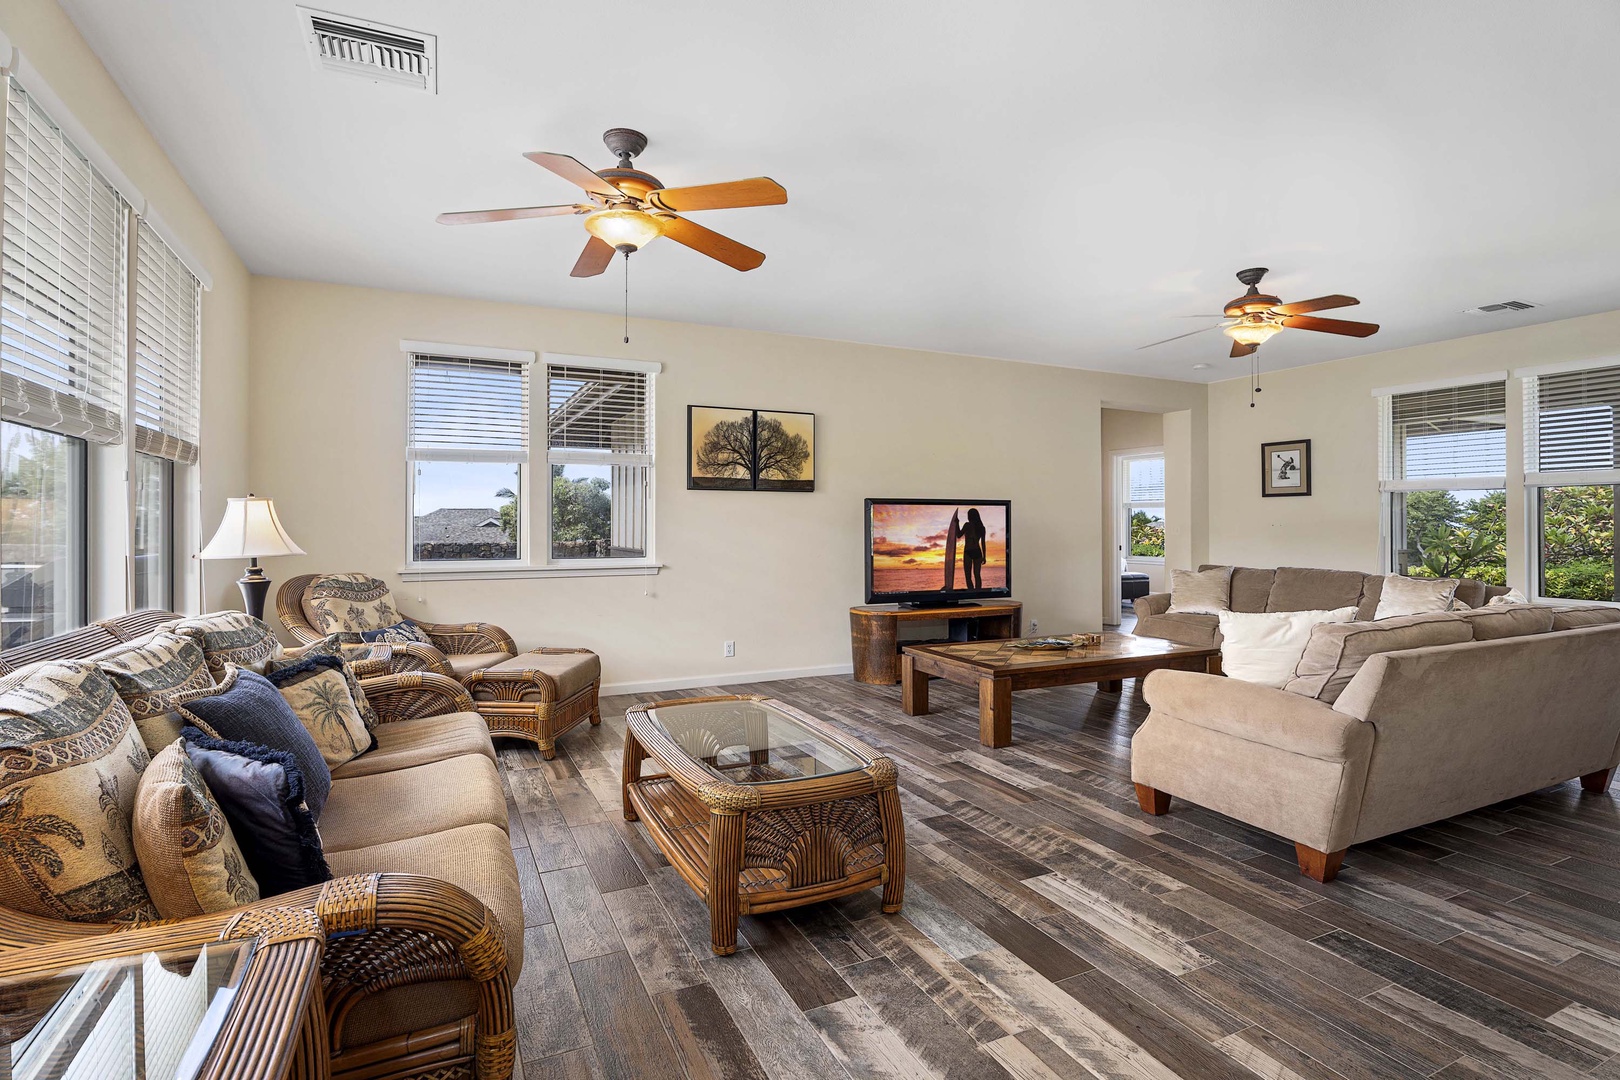 Kailua Kona Vacation Rentals, Kahakai Estates Hale - Unwind and immerse in your favorite shows.